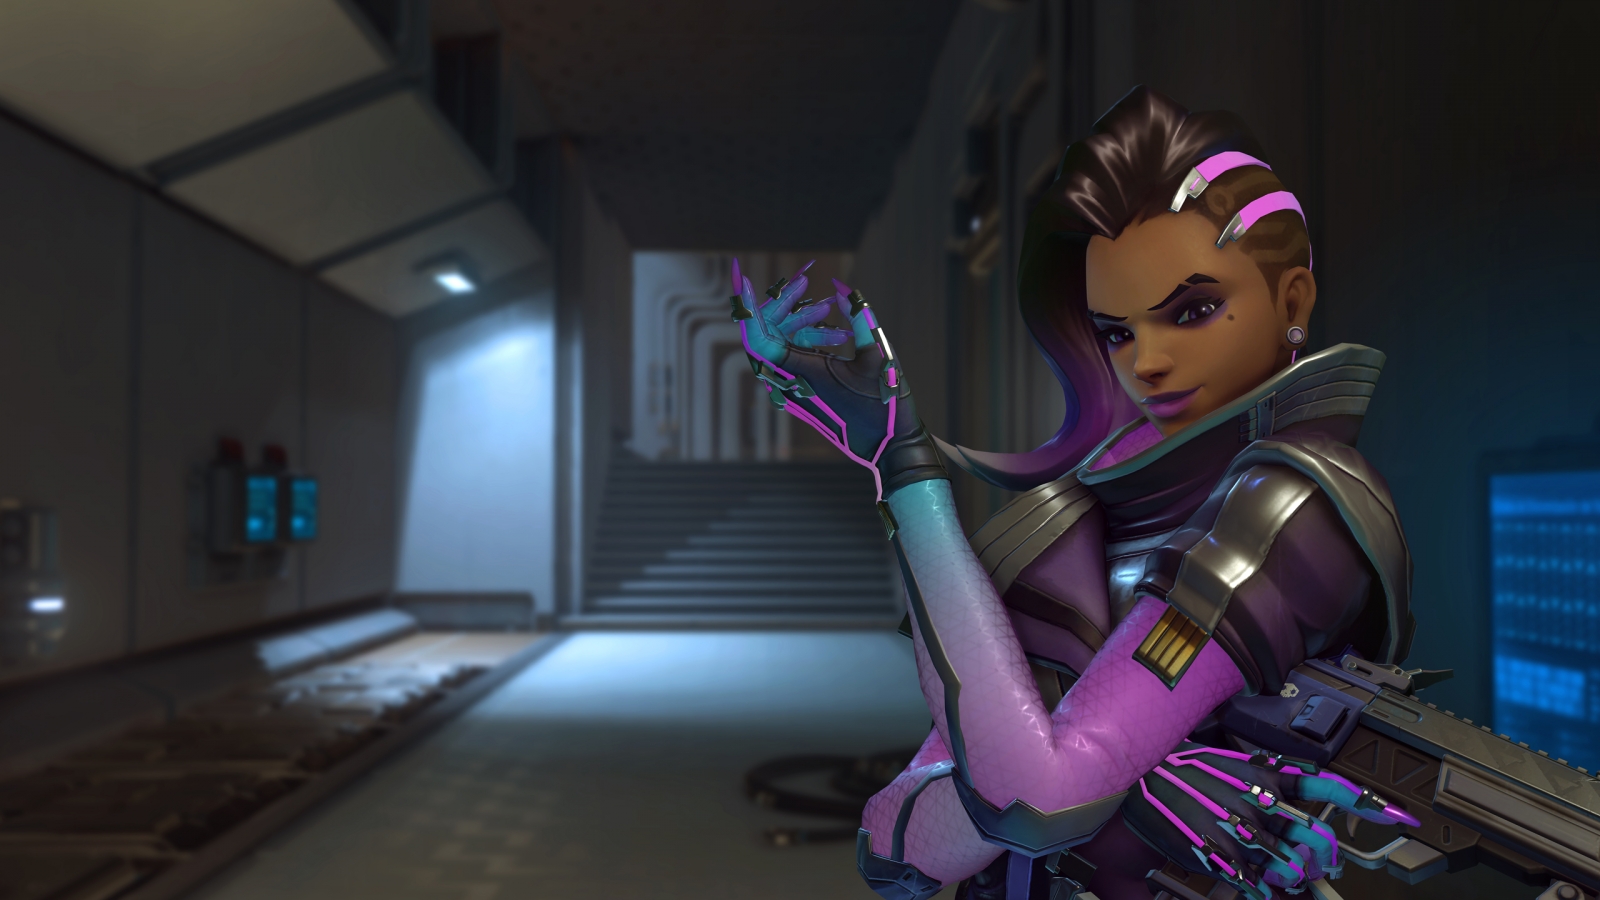 BlizzCon 2016: Sombra unveiled as Overwatch's new hero - 1600 x 900 jpeg 614kB